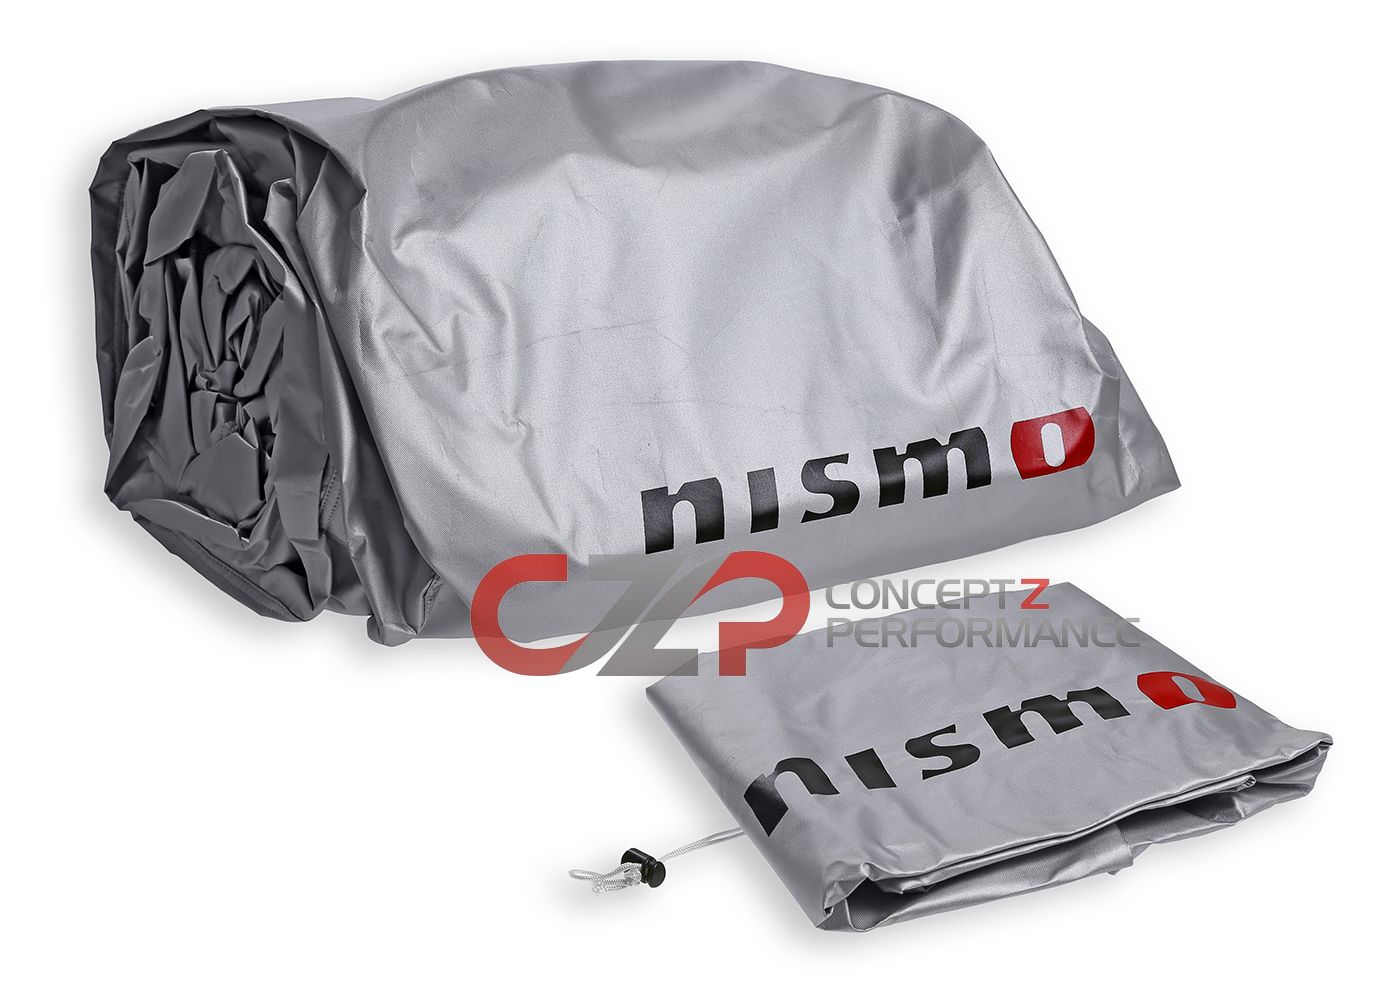 Nissan / Infiniti Nissan OEM Nismo Indoor Car Cover - Nissan 370Z 09-14 Z34  Last One!!! 999N2-ZWN00 - Concept Z Performance